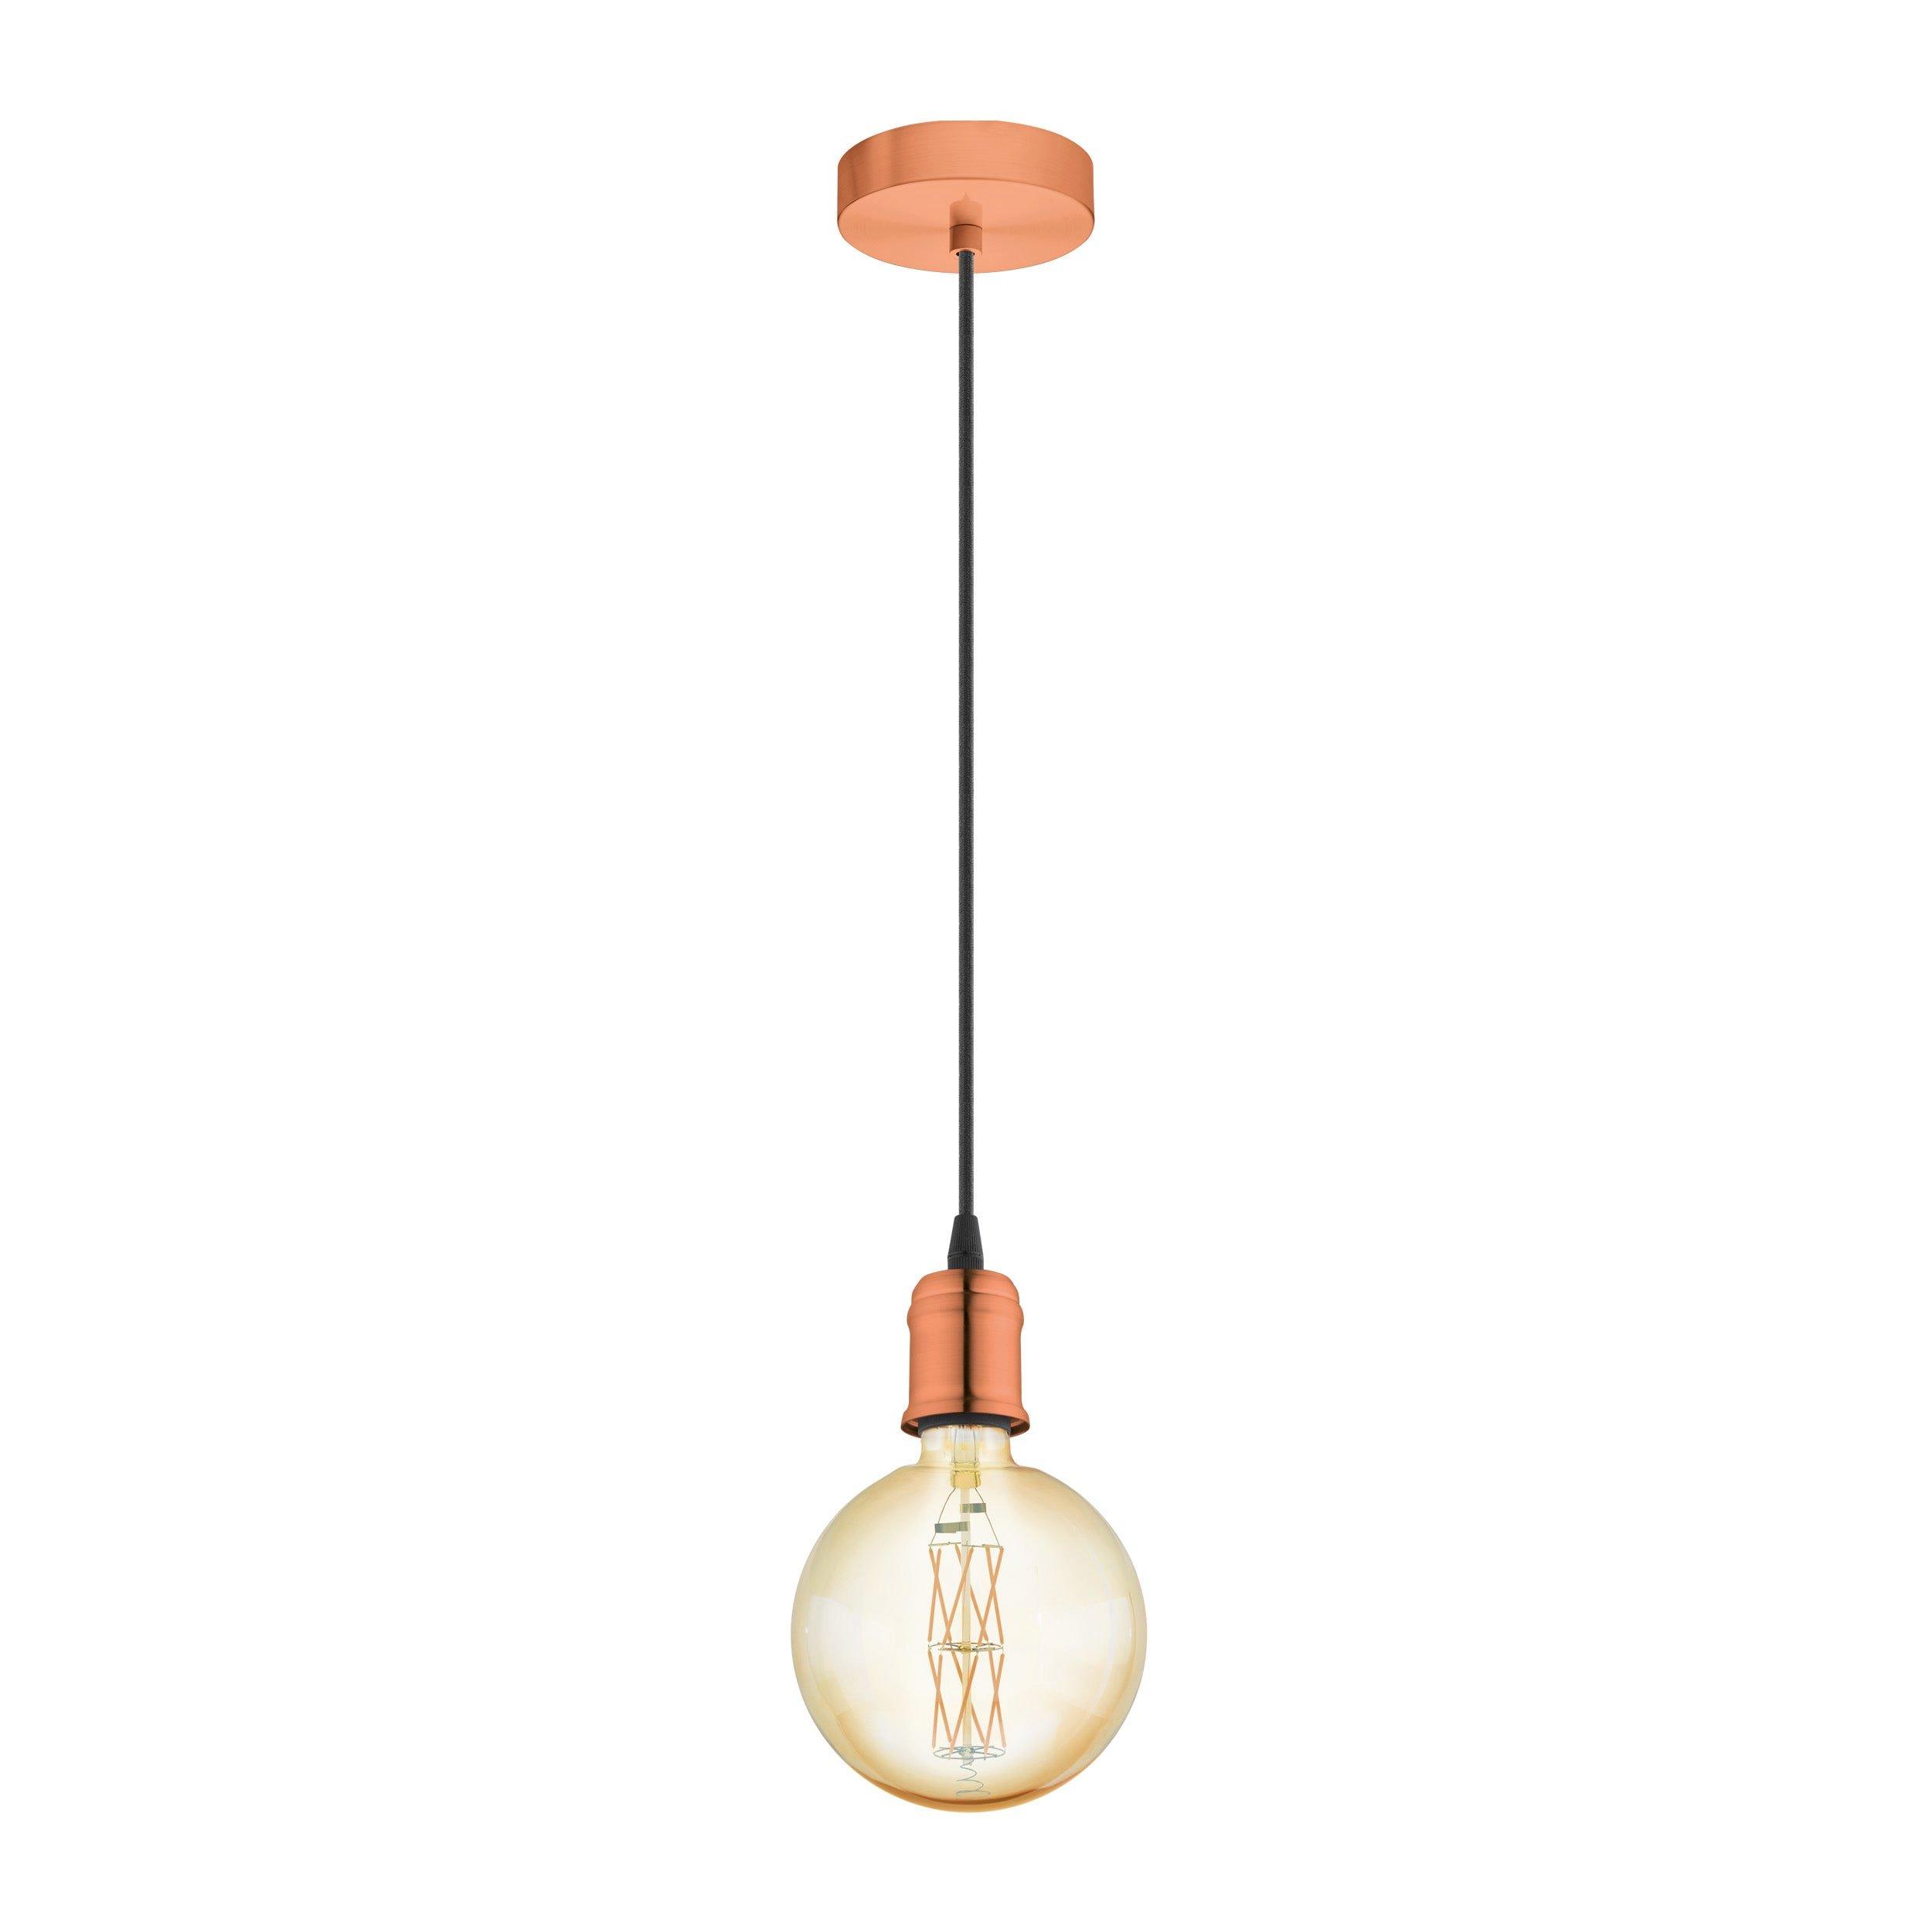 Hanging Ceiling Pendant Light Brushed Copper Steel 1x 60W E27 Bulb Feature